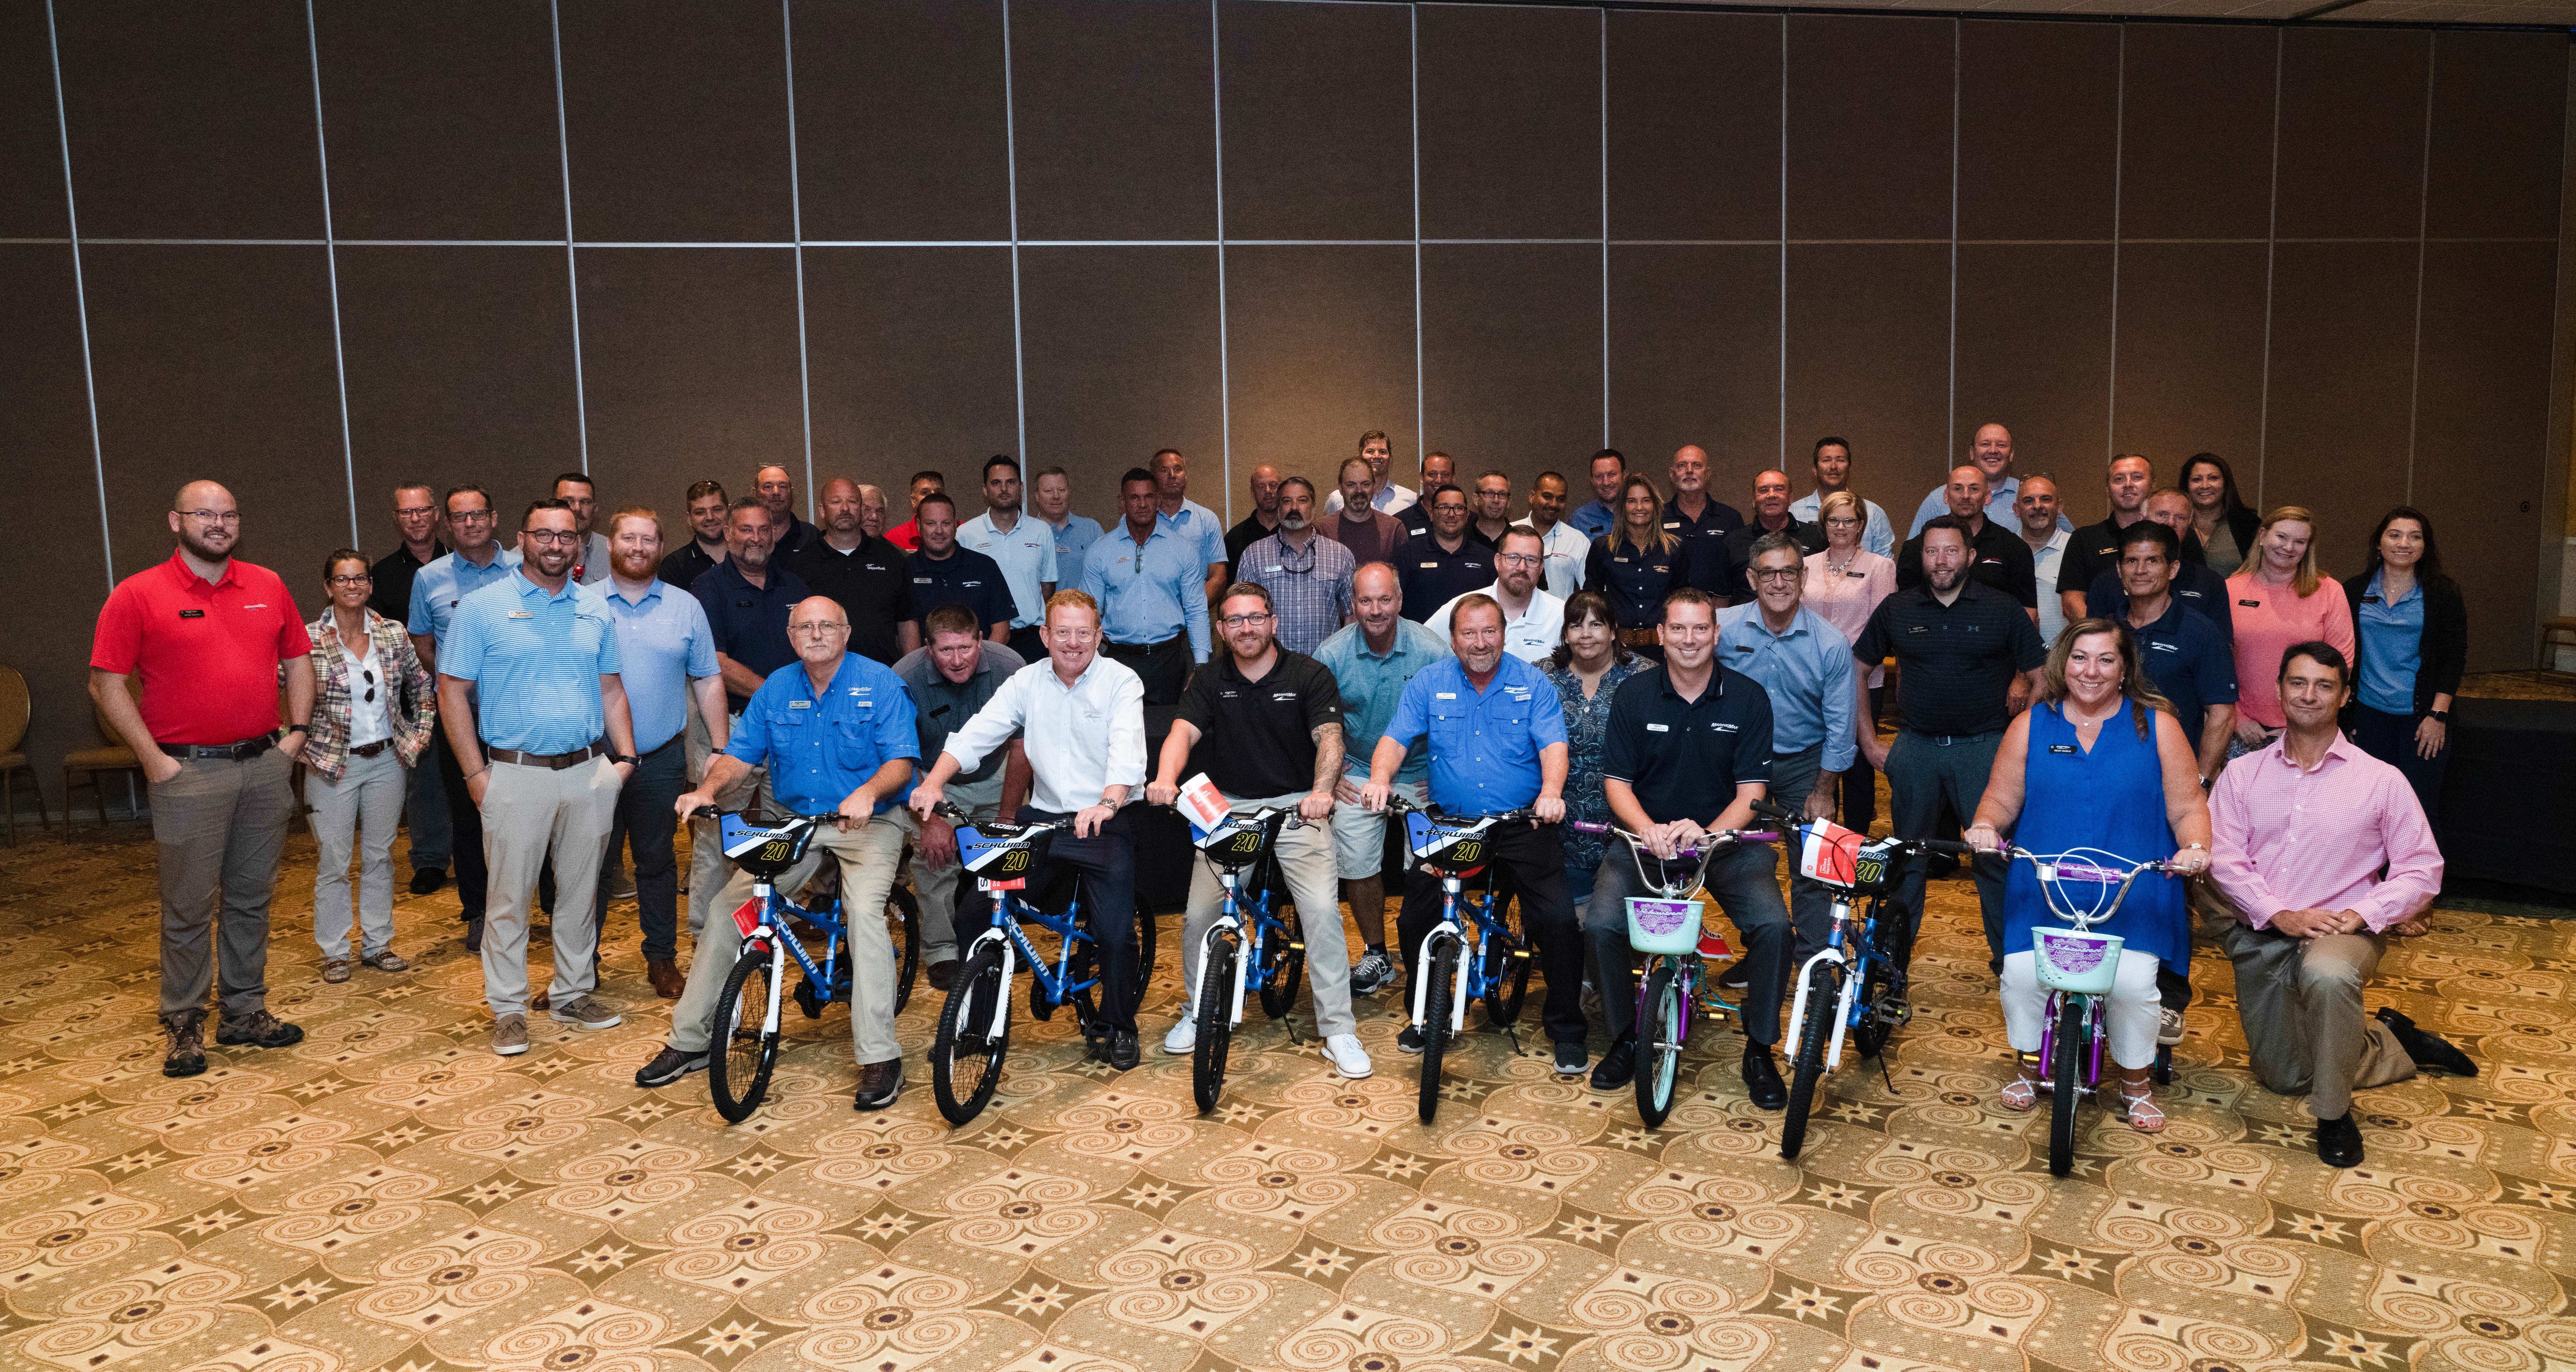 MarineMax service team builds bikes for Florida families